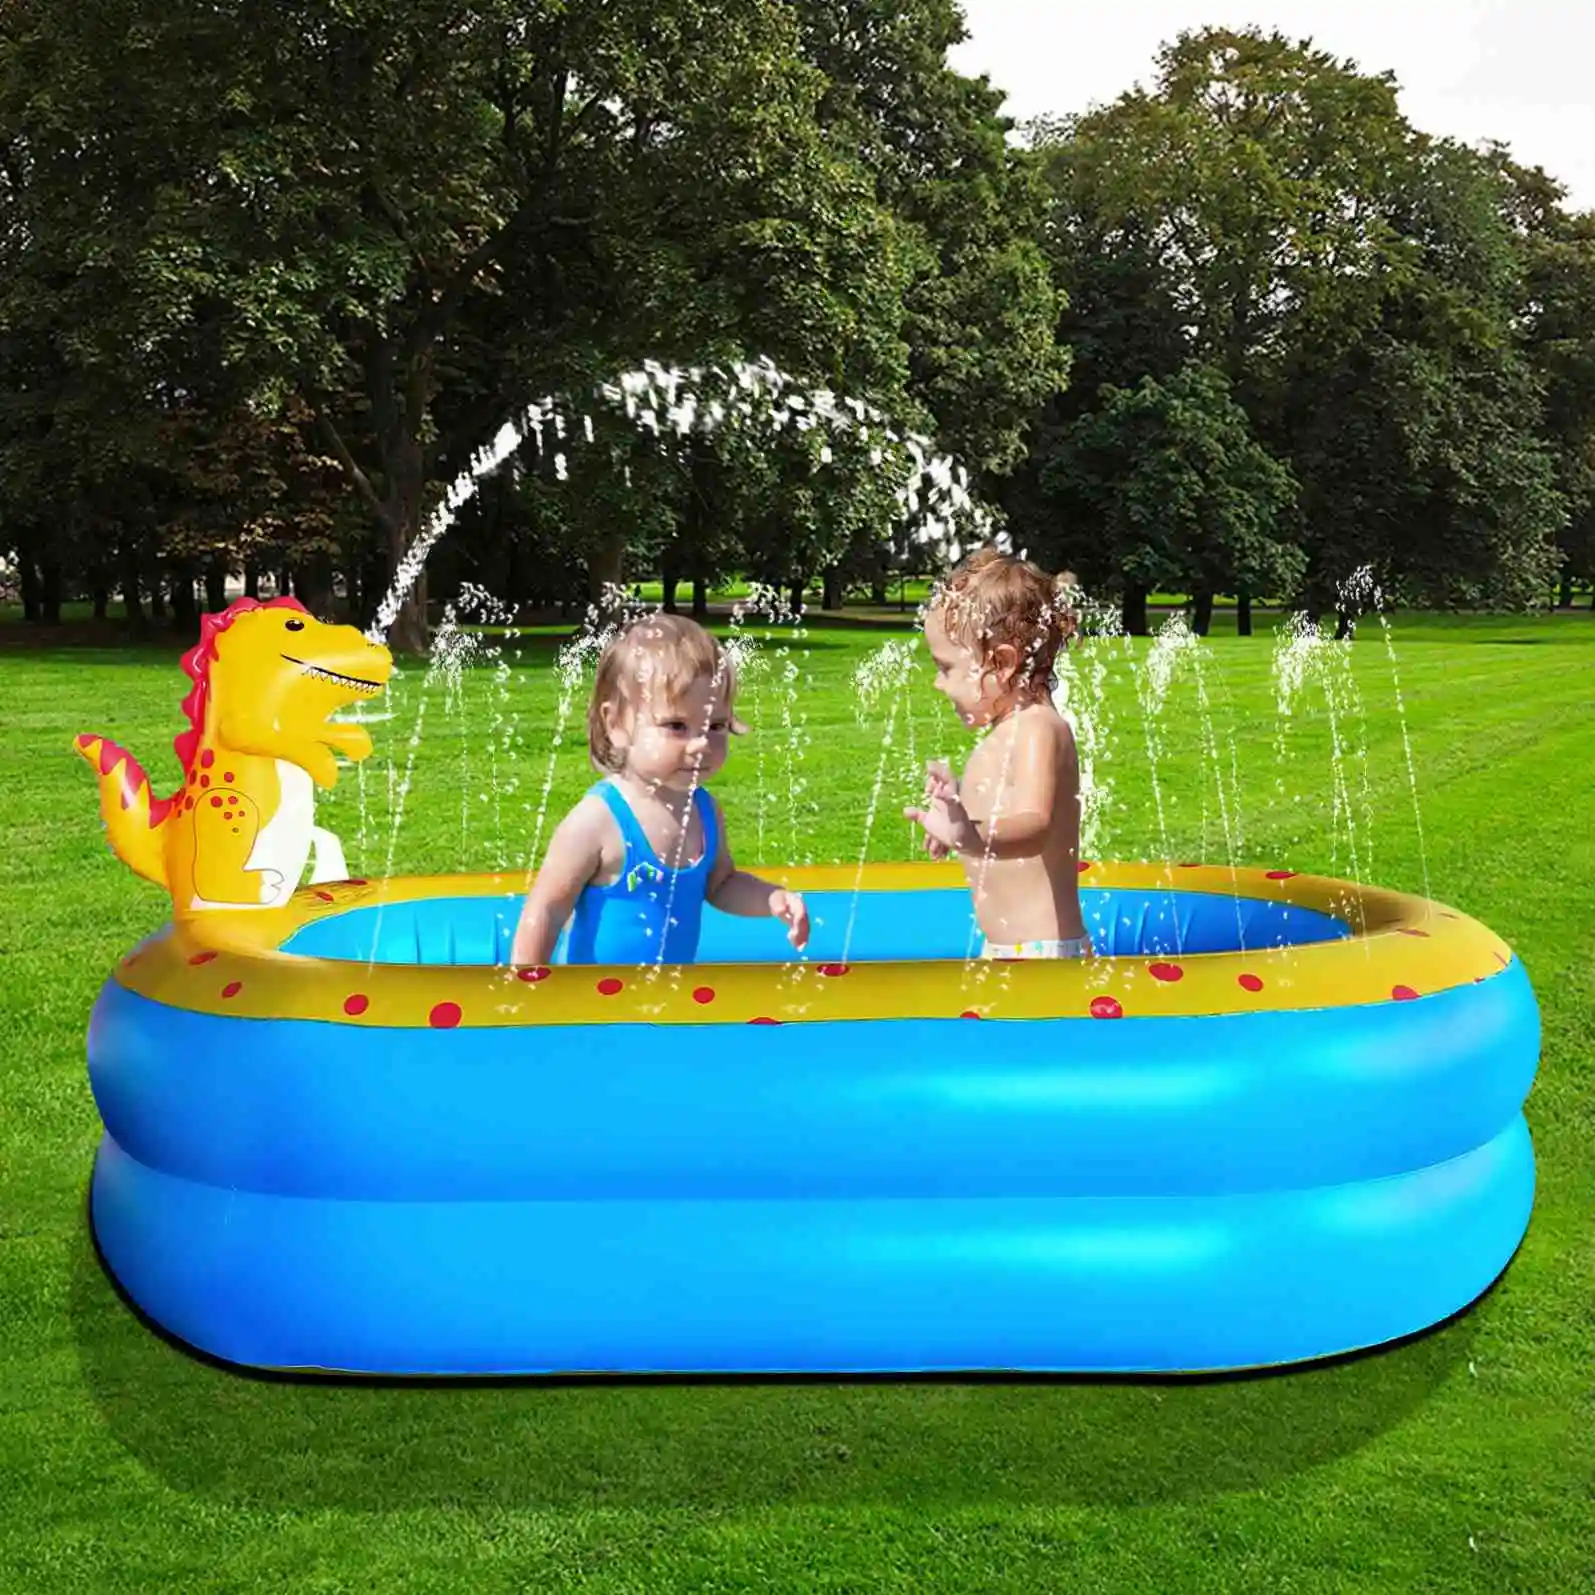 

170*103*80cm Inflatable Pool for Kids Family Kiddie Pool with Splash Swimming Pools Above Ground Garden Summer Water Party, Yellow